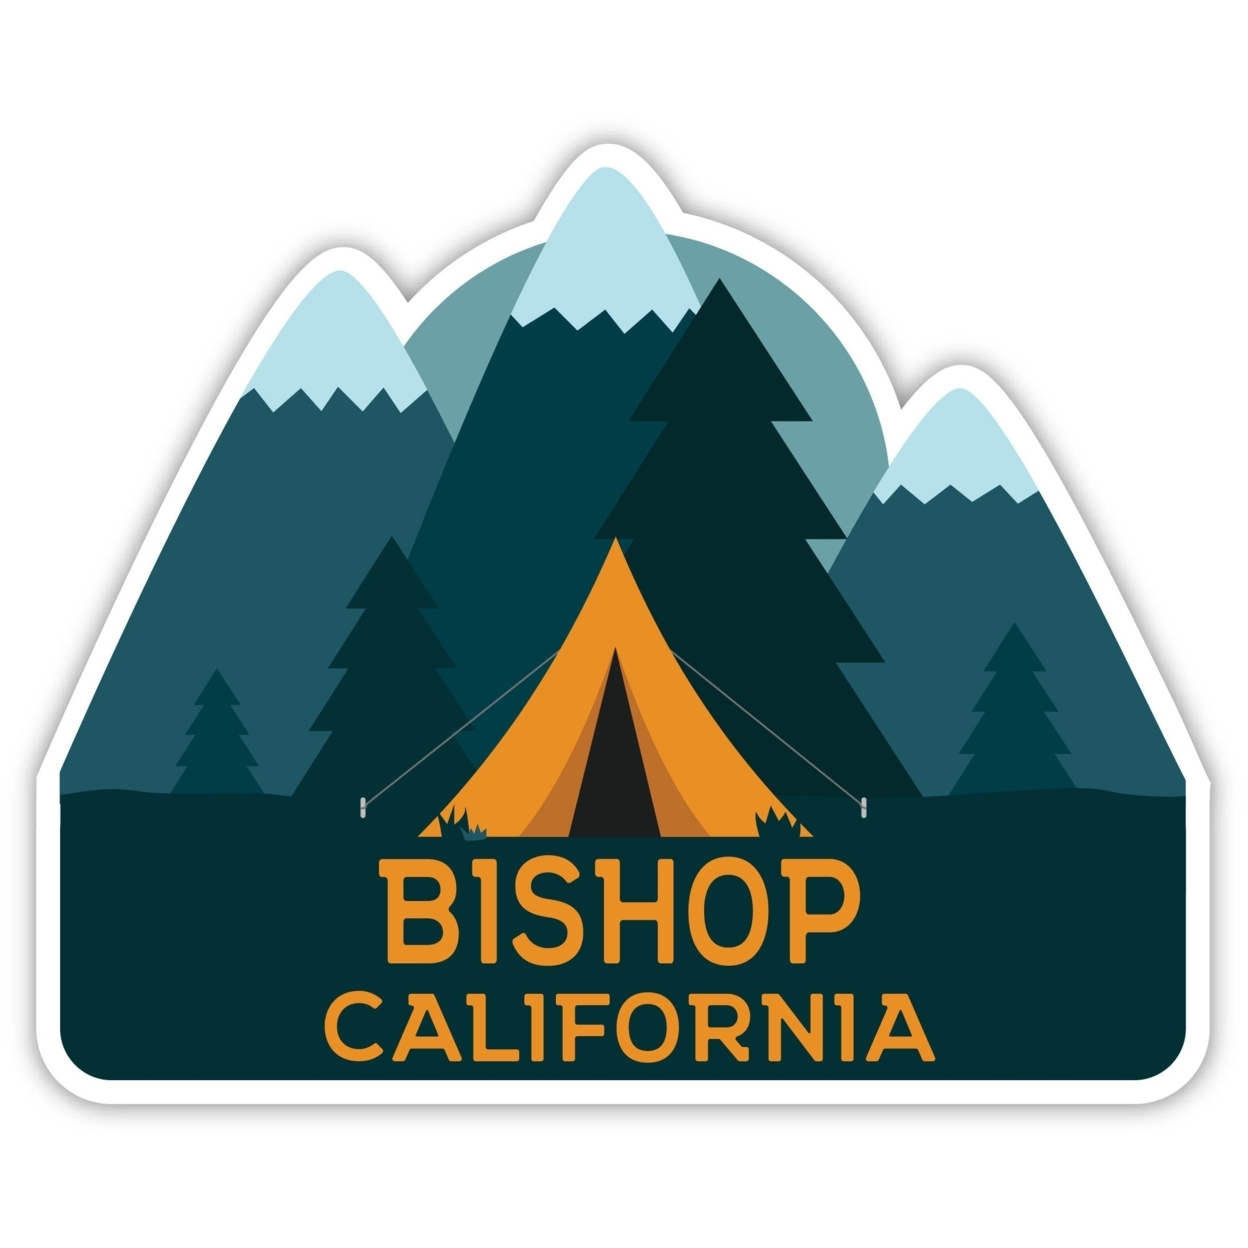 Bishop California Souvenir Decorative Stickers (Choose Theme And Size) - 4-Pack, 6-Inch, Tent